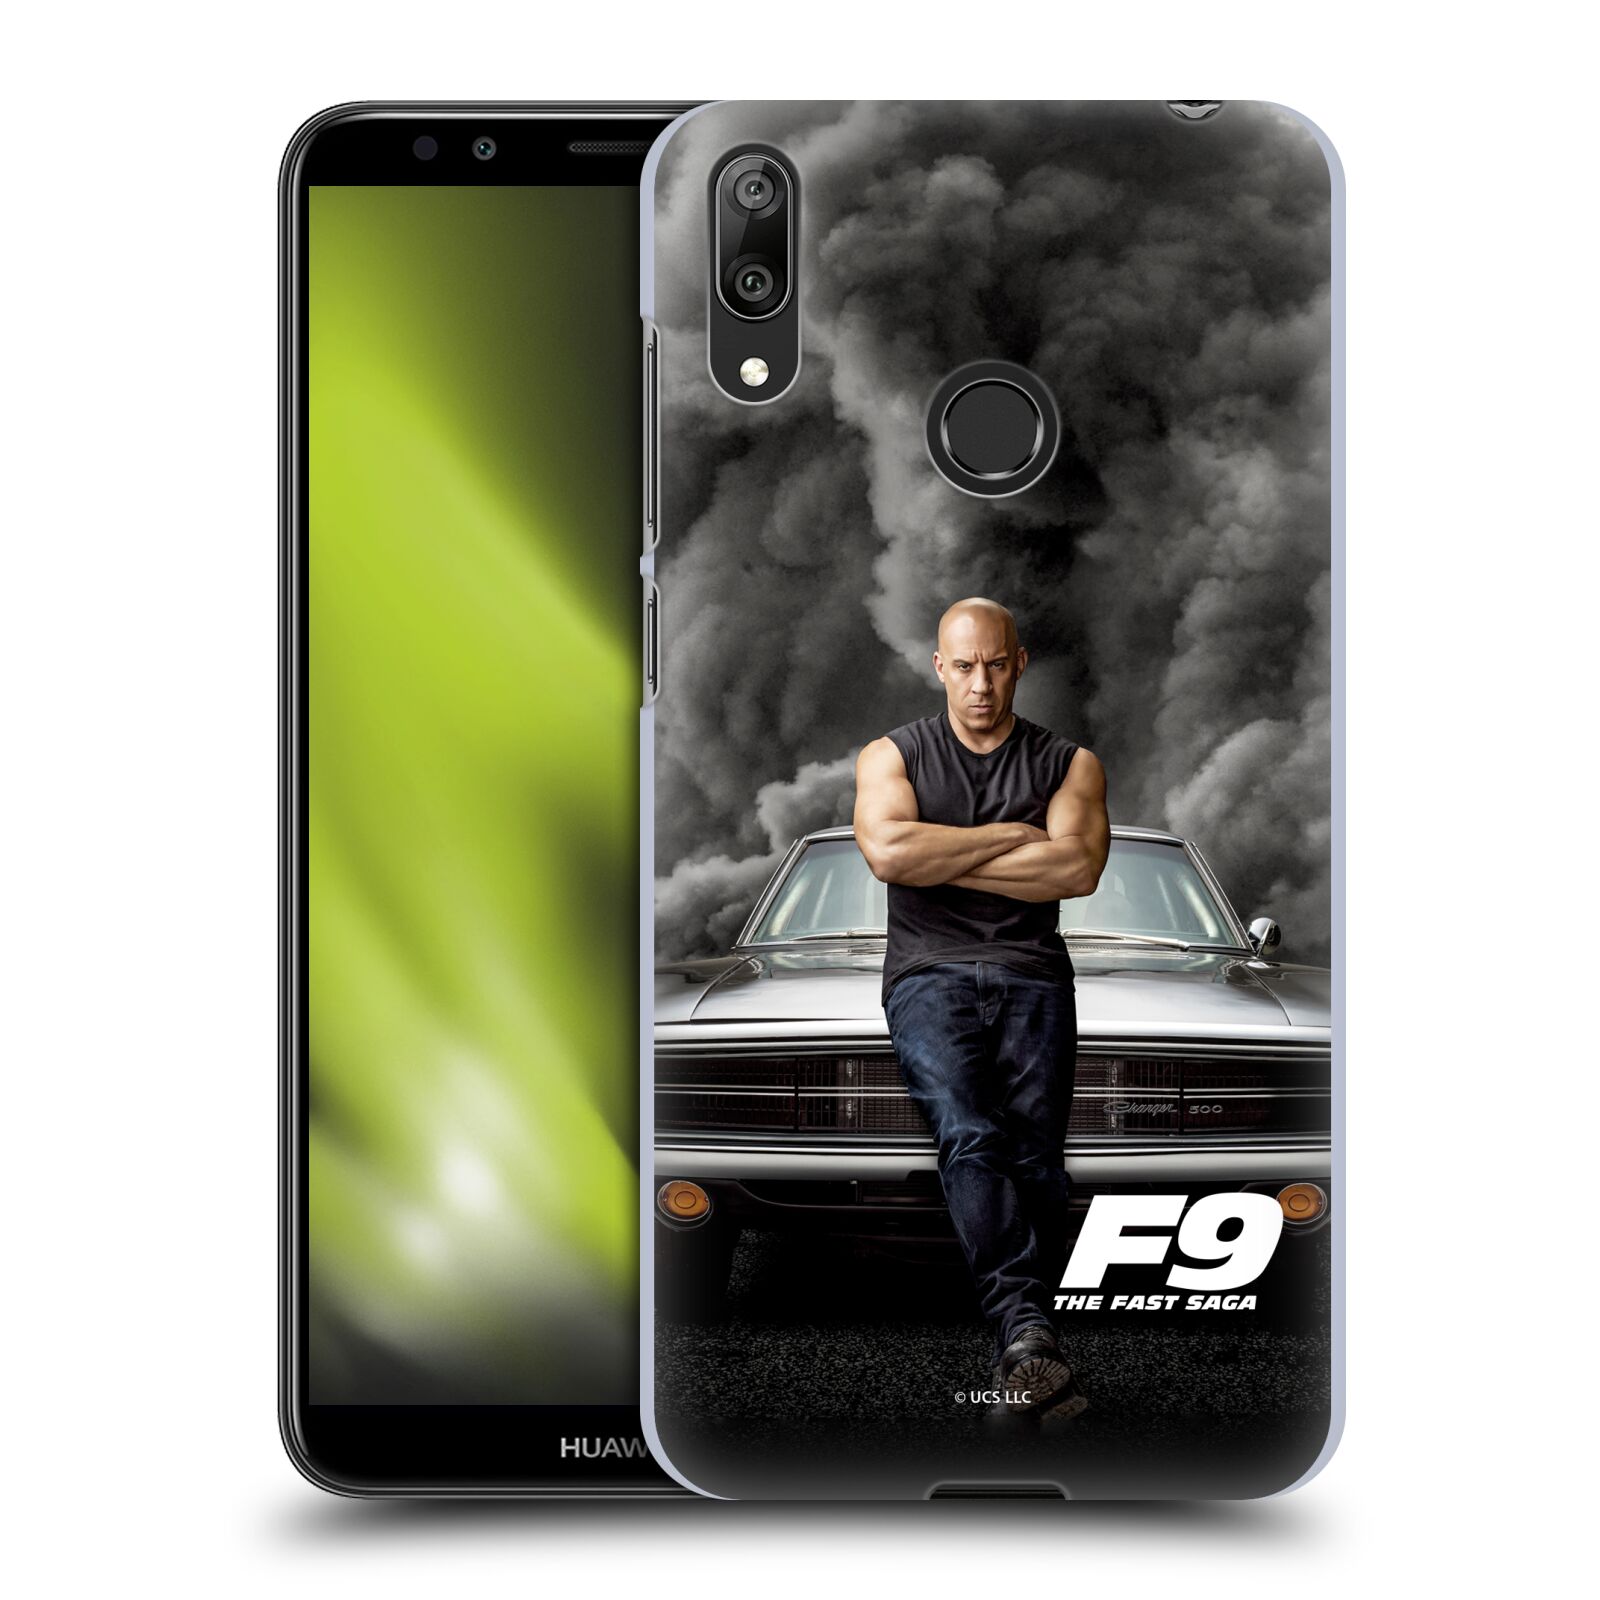 Obal na mobil Huawei Y7 2019 - HEAD CASE - Rychle a Zběsile - Dom